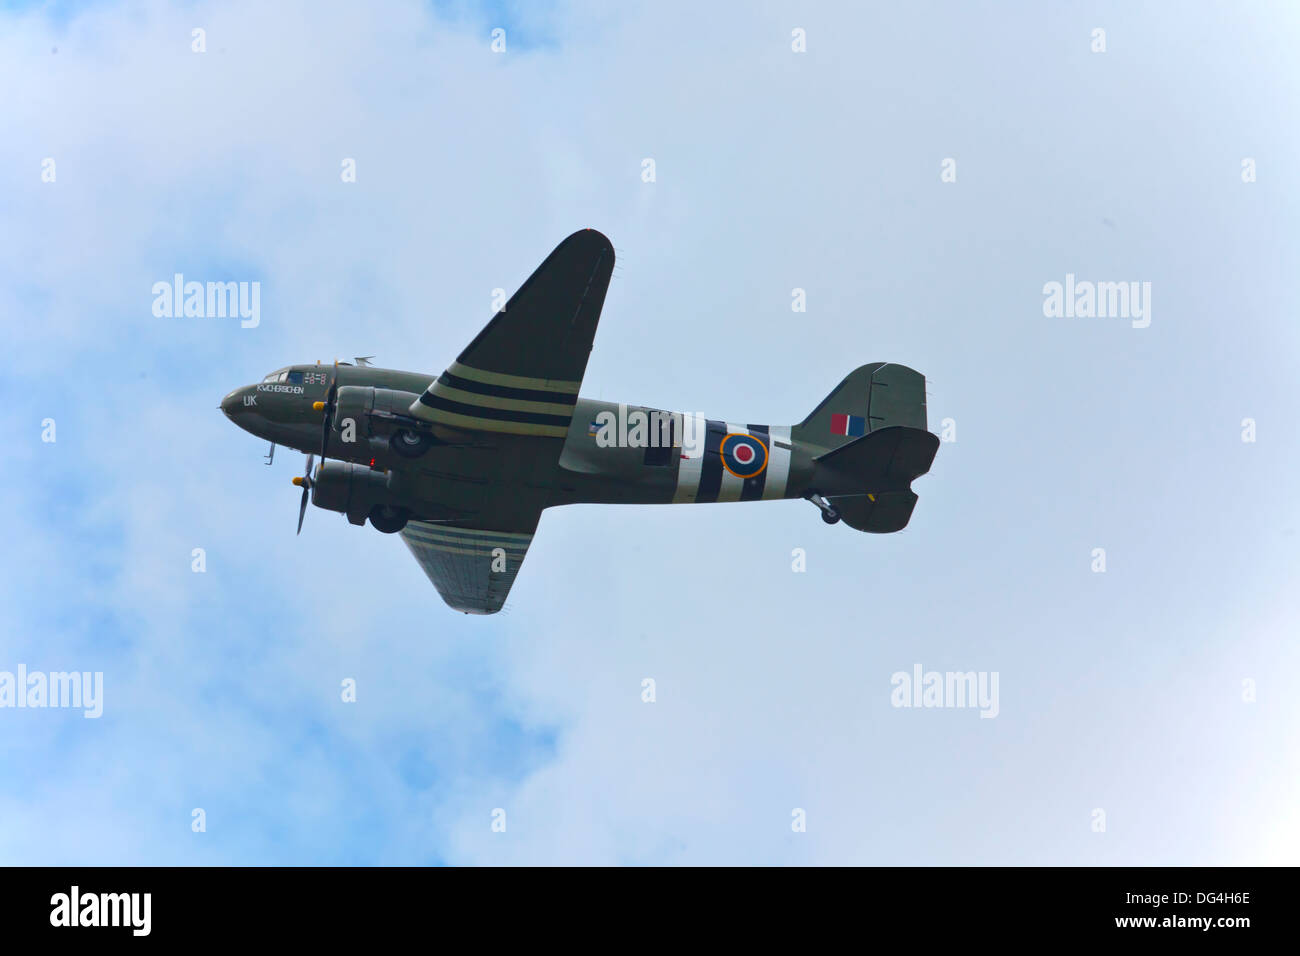 Dakota airplane flying at the WWll Day event in Saddleworth, England on August 10, 2013. Stock Photo